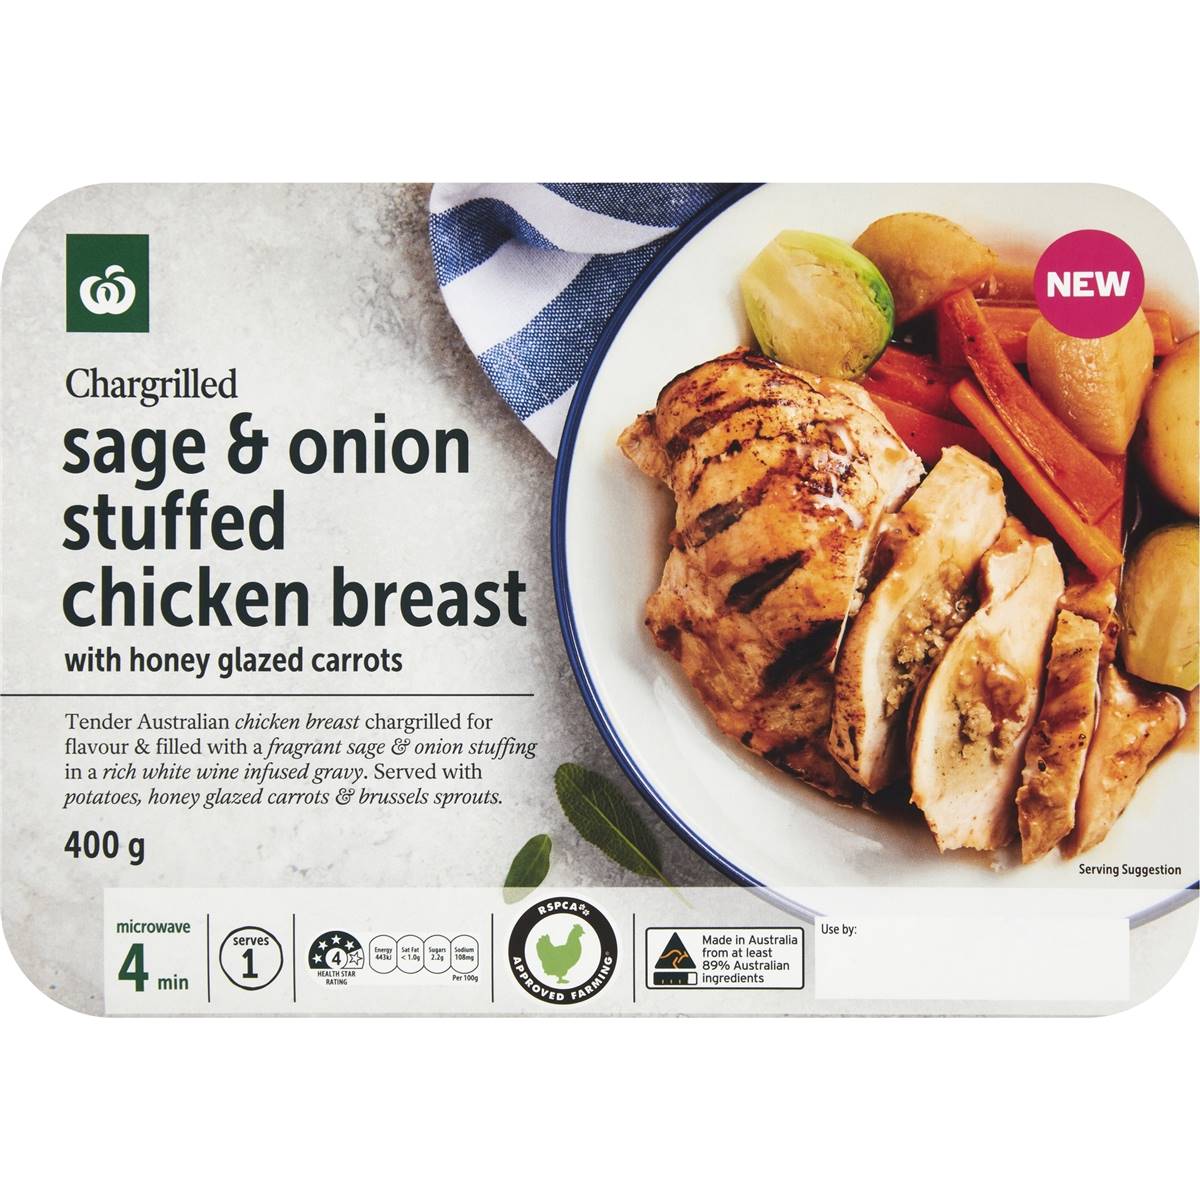 Calories in Woolworths Chargrilled Sage & Onion Stuffed Chicken Breast